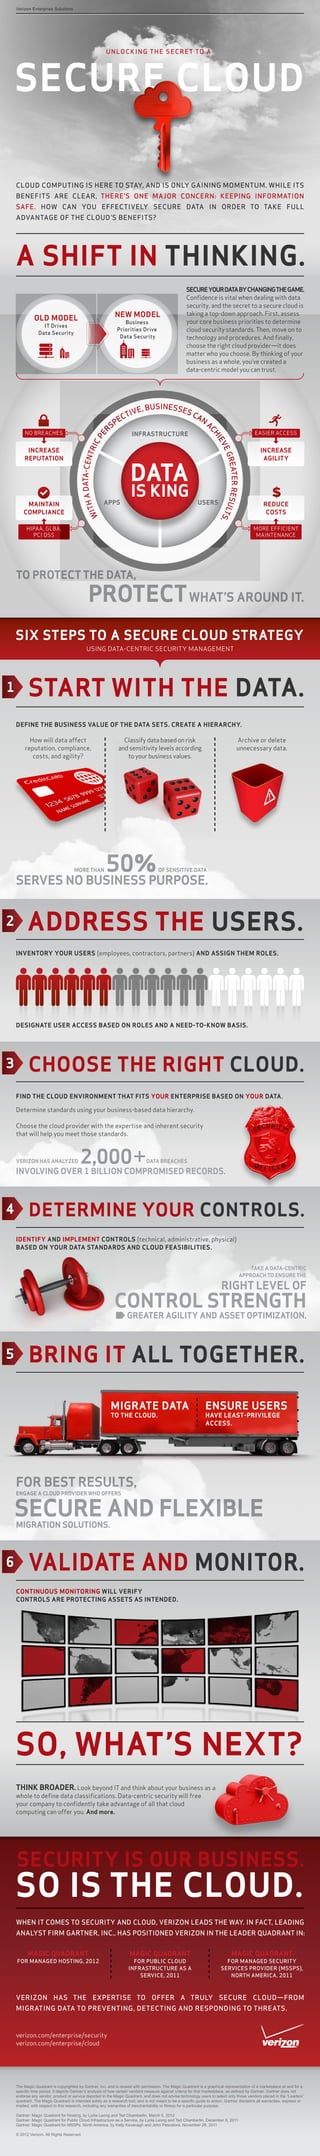 Verizon Enterprise Solutions




                                                      U N L O C K I N G T H E S E C R E T TO A




    SECURE CLOUD

    CLOUD COMPUTING IS HERE TO STAY, AND IS ONLY GAINING MOMENTUM. WHILE ITS
    BENEFITS ARE CLEAR, THERE’S ONE MAJOR CONCERN: KEEPING INFORMATION
    SAFE. HOW CAN YOU EFFECTIVELY SECURE DATA IN ORDER TO TAKE FULL
    ADVANTAGE OF THE CLOUD’S BENEFITS?




    A SHIFT IN THINKING.
                                                                                                   SECURE YOUR DATA BY CHANGING THE GAME.
                                                                                                   Conﬁdence is vital when dealing with data
                                                                                                   security, and the secret to a secure cloud is
                                                             NEW MODEL                             taking a top-down approach. First, assess
              OLD MODEL                                         Business                           your core business priorities to determine
                  IT Drives
                Data Security
                                                             Priorities Drive                      cloud security standards. Then, move on to
                                                              Data Security                        technology and procedures. And ﬁnally,
                                                                                                   choose the right cloud provider—it does
                                                                                                   matter who you choose. By thinking of your
                                                                                                   business as a whole, you’ve created a
                                                                                                   data-centric model you can trust.




                                                                         E,   BUS I N E S SES
                                                                C   T IV                               CA
                                                             PE                                           N
                                                         S                                                    A
                                                  R




         NO BREACHES                                                                                                                      EASIER ACCESS
                                                                                                               CH




                                                                      INFRASTRUCTURE
                                              PE




                                                                                                                   IE
                                            IC




                                                                                                                      VE




         INCREASE                                                                                                                            INCREASE
                                           TR




                                                                                                                         G RE




        REPUTATION                                                                                                                            AGILITY
                                       DATA-CEN




                                                                                                                       ES  ATER R
                                             A




                                                     APPS                                                 USERS
                                        I TH




         MAINTAIN                                                                                                                              REDUCE
                                                                                                                          ULT




        COMPLIANCE                                                                                                                              COSTS
                                            W




                                                                                                                      .       S




         HIPAA, GLBA,                                                                                                                    MORE EFFICIENT
           PCI DSS                                                                                                                        MAINTENANCE




    TO PROTECT THE DATA,

                                            PROTECT WHAT’S AROUND IT.
    SIX STEPS TO A SECURE CLOUD STRATEGY
                                           USING DATA-CENTRIC SECURITY MANAGEMENT




1          START WITH THE DATA.
    DEFINE THE BUSINESS VALUE OF THE DATA SETS. CREATE A HIERARCHY.

           How will data affect                                 Classify data based on risk                                     Archive or delete
         reputation, compliance,                              and sensitivity levels according                                  unnecessary data.
            costs, and agility?                                  to your business values.




                                    MORE THAN         50%                           OF SENSITIVE DATA

    SERVES NO BUSINESS PURPOSE.


2         ADDRESS THE USERS.
    INVENTORY YOUR USERS (employees, contractors, partners) AND ASSIGN THEM ROLES.




    DESIGNATE USER ACCESS BASED ON ROLES AND A NEED-TO-KNOW BASIS.




3          CHOOSE THE RIGHT CLOUD.
    FIND THE CLOUD ENVIRONMENT THAT FITS YOUR ENTERPRISE BASED ON YOUR DATA.

    Determine standards using your business-based data hierarchy.

    Choose the cloud provider with the expertise and inherent security
    that will help you meet those standards.



    VERIZON HAS ANALYZED                2,000                                 DATA BREACHES

    INVOLVING OVER 1 BILLION COMPROMISED RECORDS.



4          DETERMINE YOUR CONTROLS.
    IDENTIFY AND IMPLEMENT CONTROLS (technical, administrative, physical)
    BASED ON YOUR DATA STANDARDS AND CLOUD FEASIBILITIES.


                                                                                                                                     TAKE A DATA-CENTRIC
                                                                                                                                 APPROACH TO ENSURE THE

                                                                                                                       RIGHT LEVEL OF
                                                           CONTROL STRENGTH
                                                                    GREATER AGILITY AND ASSET OPTIMIZATION.



5          BRING IT ALL TOGETHER.

                                                         MIGRATE DATA                                         ENSURE USERS
                                                         TO THE CLOUD.                                        HAVE LEAST-PRIVILEGE
                                                                                                              ACCESS.




    FOR BEST RESULTS,
    ENGAGE A CLOUD PROVIDER WHO OFFERS


    SECURE AND FLEXIBLE
    MIGRATION SOLUTIONS.



6          VALIDATE AND MONITOR.
    CONTINUOUS MONITORING WILL VERIFY
    CONTROLS ARE PROTECTING ASSETS AS INTENDED.




    SO, WHAT’S NEXT?
    THINK BROADER. Look beyond IT and think about your business as a
    whole to deﬁne data classiﬁcations. Data-centric security will free
    your company to conﬁdently take advantage of all that cloud
    computing can offer you. And more.




    SECURITY IS OUR BUSINESS.
    SO IS THE CLOUD.
    WHEN IT COMES TO SECURITY AND CLOUD, VERIZON LEADS THE WAY. IN FACT, LEADING
    ANALYST FIRM GARTNER, INC., HAS POSITIONED VERIZON IN THE LEADER QUADRANT IN:


          MAGIC QUADRANT                                             MAGIC QUADRANT                                          MAGIC QUADRANT
    FOR MANAGED HOSTING, 2012                                         FOR PUBLIC CLOUD                                   FOR MANAGED SECURITY
                                                                    INFRASTRUCTURE AS A                                SERVICES PROVIDER (MSSPS),
                                                                        SERVICE, 2011                                     NORTH AMERICA, 2011



    VERIZON HAS THE EXPERTISE TO OFFER A TRULY SECURE CLOUD—FROM
    MIGRATING DATA TO PREVENTING, DETECTING AND RESPONDING TO THREATS.



    verizon.com/enterprise/security
    verizon.com/enterprise/cloud




    The Magic Quadrant is copyrighted by Gartner, Inc. and is reused with permission. The Magic Quadrant is a graphical representation of a marketplace at and for a
    speciﬁc time period. It depicts Gartner’s analysis of how certain vendors measure against criteria for that marketplace, as deﬁned by Gartner. Gartner does not
    endorse any vendor, product or service depicted in the Magic Quadrant, and does not advise technology users to select only those vendors placed in the “Leaders”
    quadrant. The Magic Quadrant is intended solely as a research tool, and is not meant to be a speciﬁc guide to action. Gartner disclaims all warranties, express or
    implied, with respect to this research, including any warranties of merchantability or ﬁtness for a particular purpose.

    Gartner: Magic Quadrant for Hosting, by Lydia Leong and Ted Chamberlin, March 5, 2012
    Gartner: Magic Quadrant for Public Cloud Infrastructure as a Service, by Lydia Leong and Ted Chamberlin, December 8, 2011
    Gartner: Magic Quadrant for MSSPs, North America, by Kelly Kavanagh and John Pescatore, November 28, 2011

    © 2012 Verizon. All Rights Reserved.
 